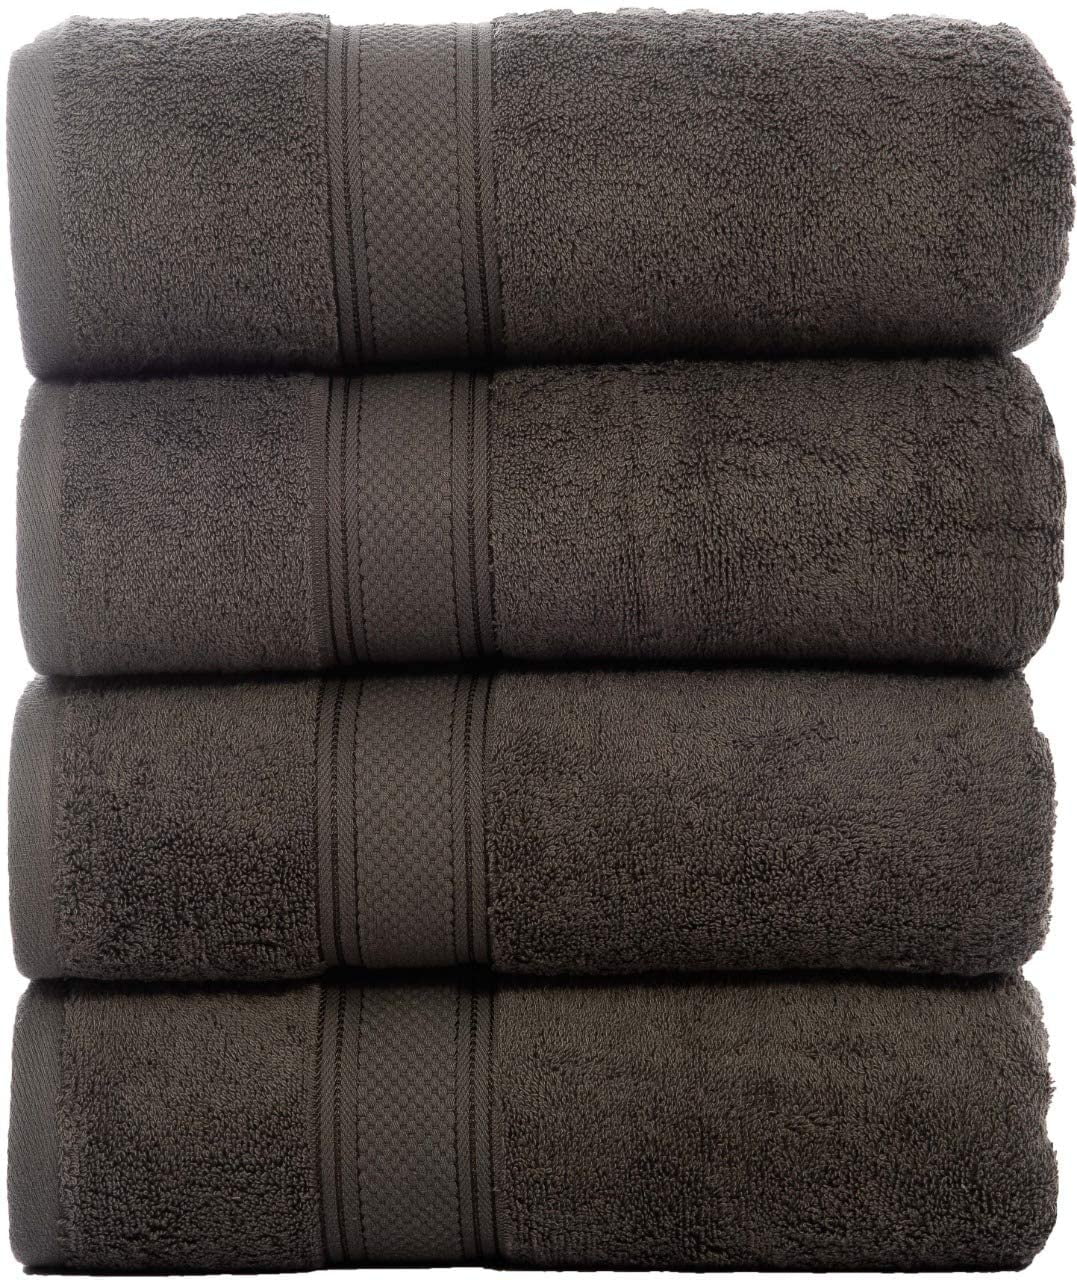 Bliss Casa Bath Towels High GSM Towel Set 100% Ring Spun Cotton Quick Dry & Highly Absorbent Perfect for Daily Use AQUA, 2 Pack 